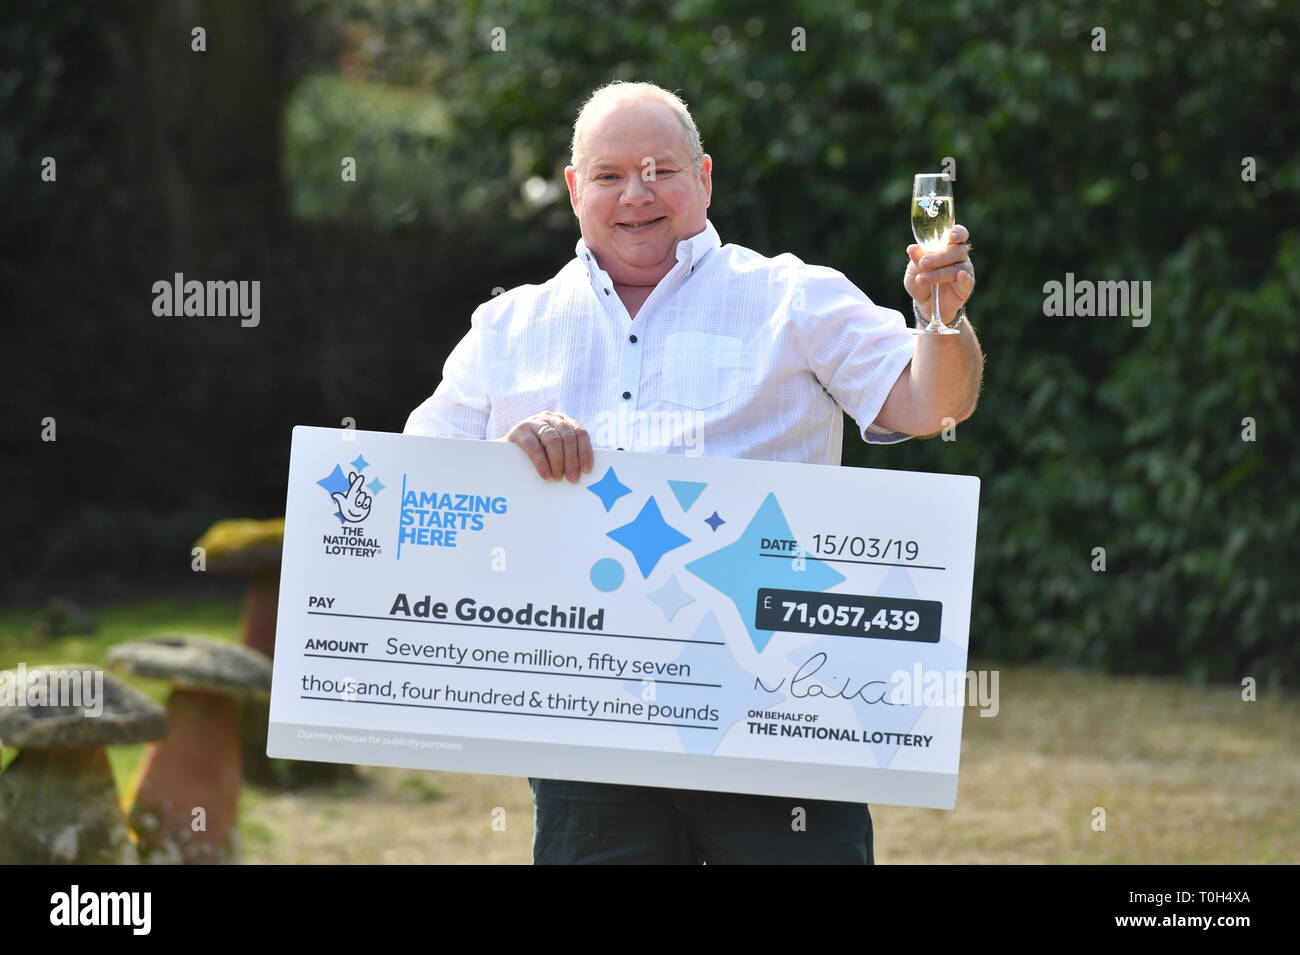 Ade Goodchild, 58, a factory worker from Hereford celebrates after scooping £71,057,439 in Friday's EuroMillions draw at the Abbey Hotel, Great Malvern. Stock Photo